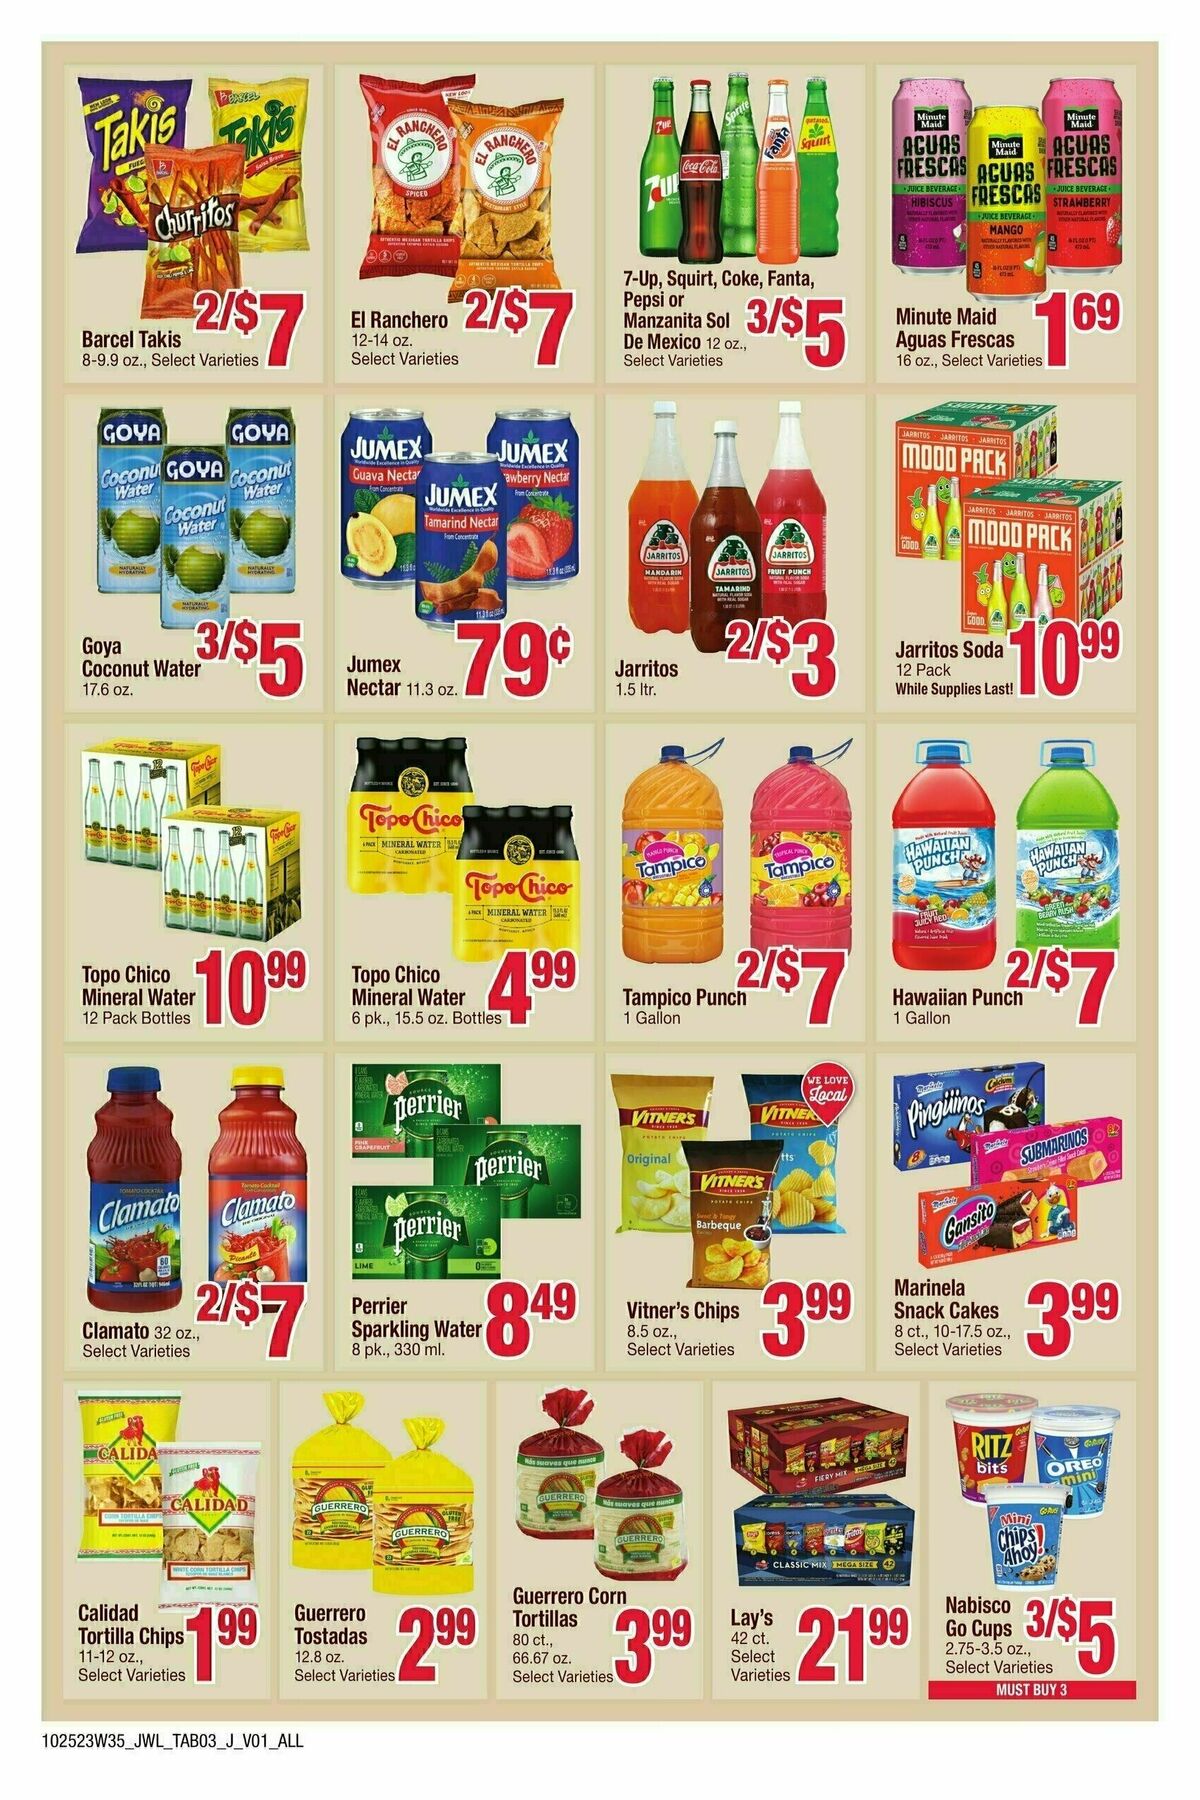 Jewel Osco Specialty Publication Weekly Ad from October 25